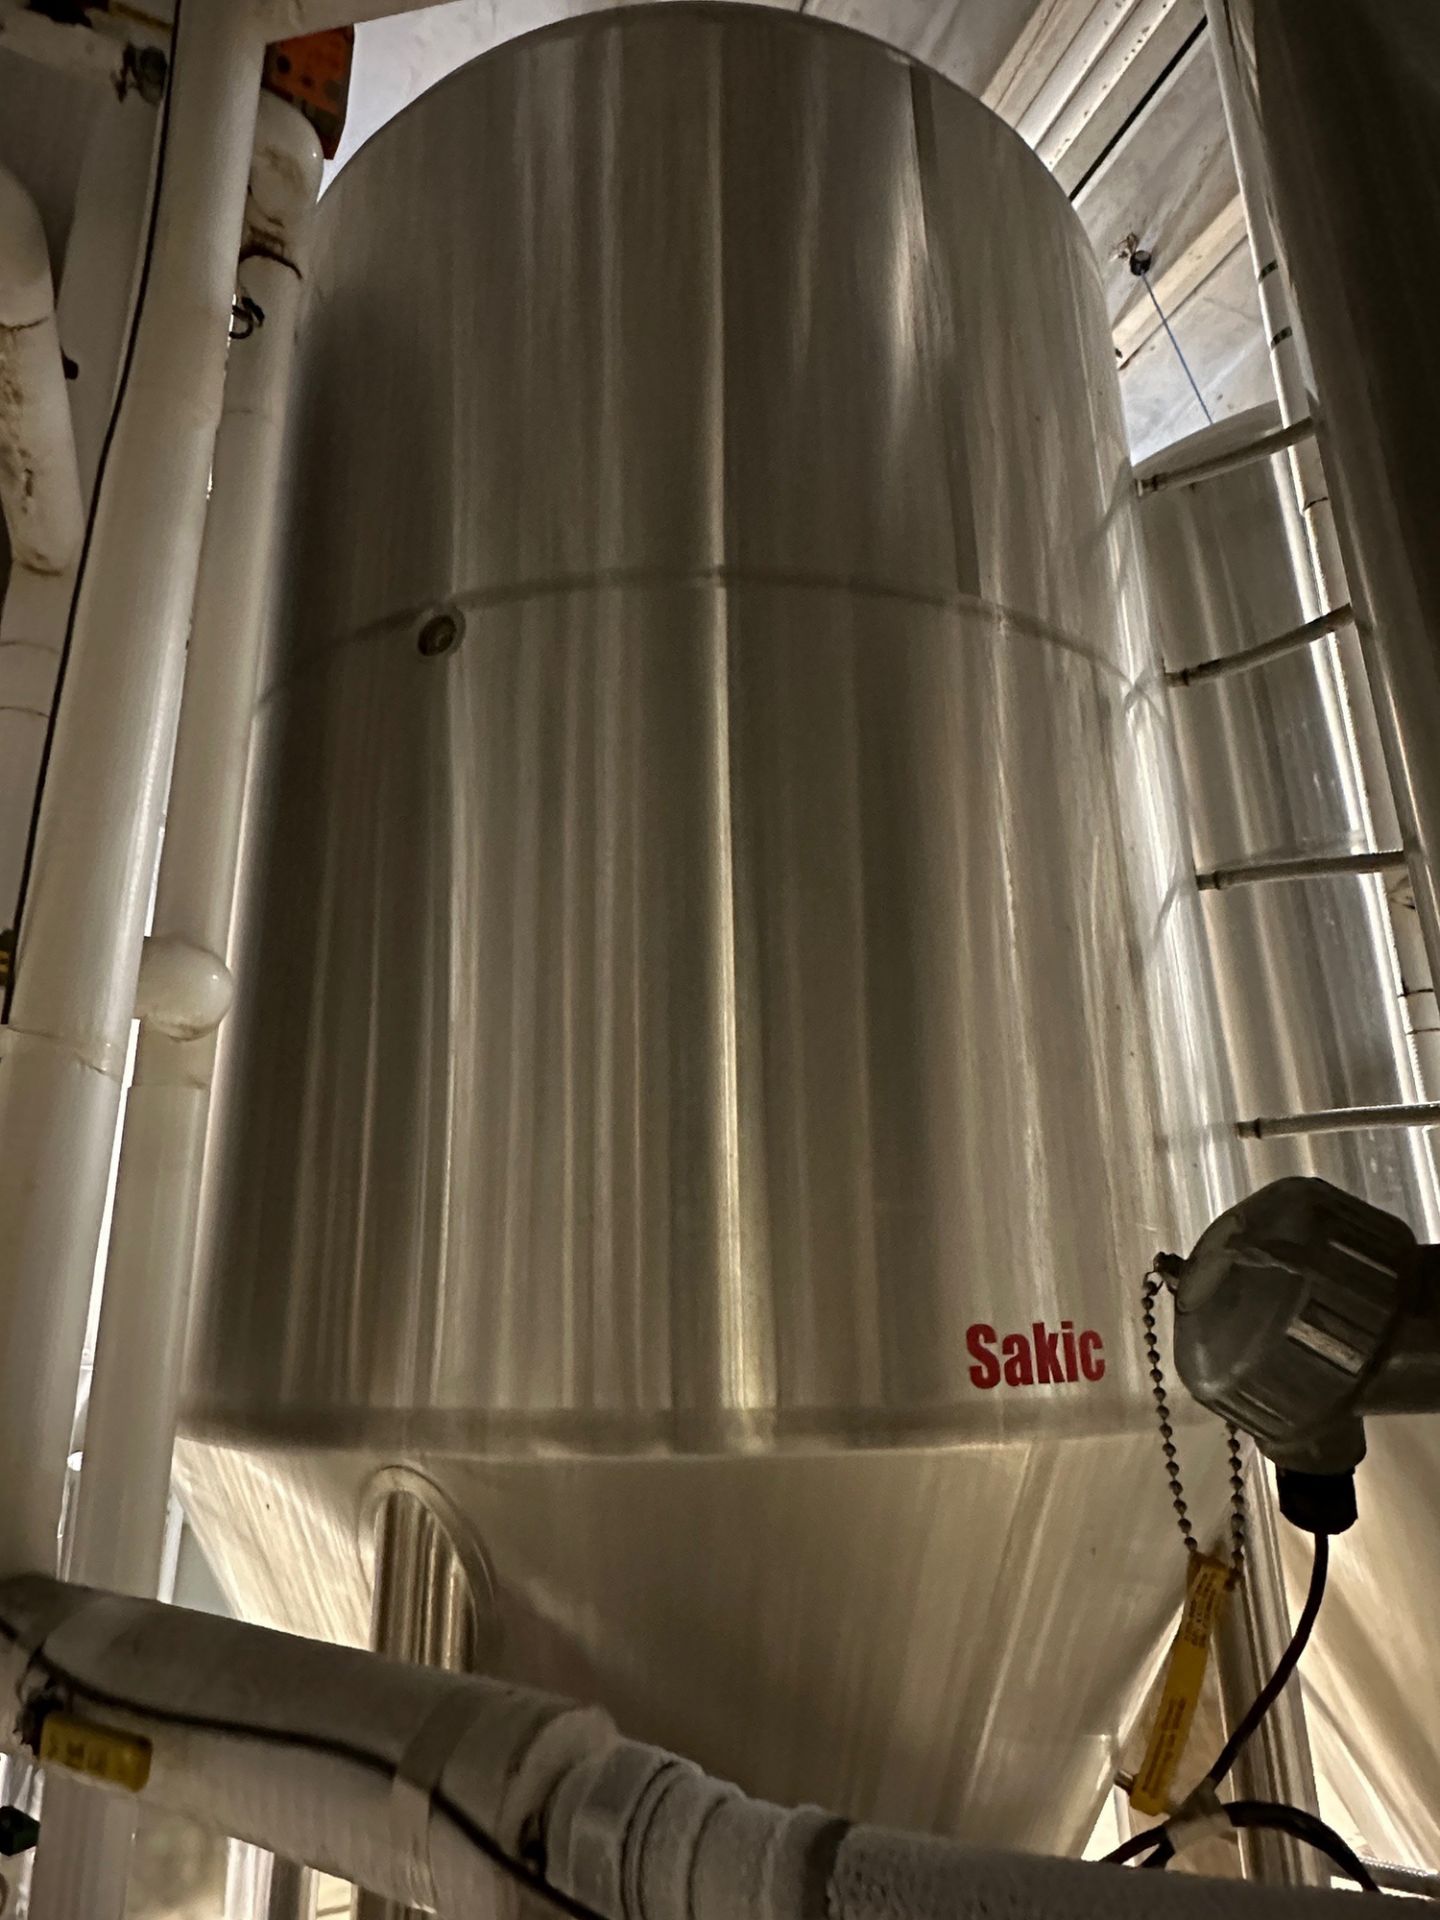 Premier Stainless 80 BBL Stainless Steel Fermentation Tank - Cone Bottom, Glycol Ja | Rig Fee $1850 - Image 3 of 5